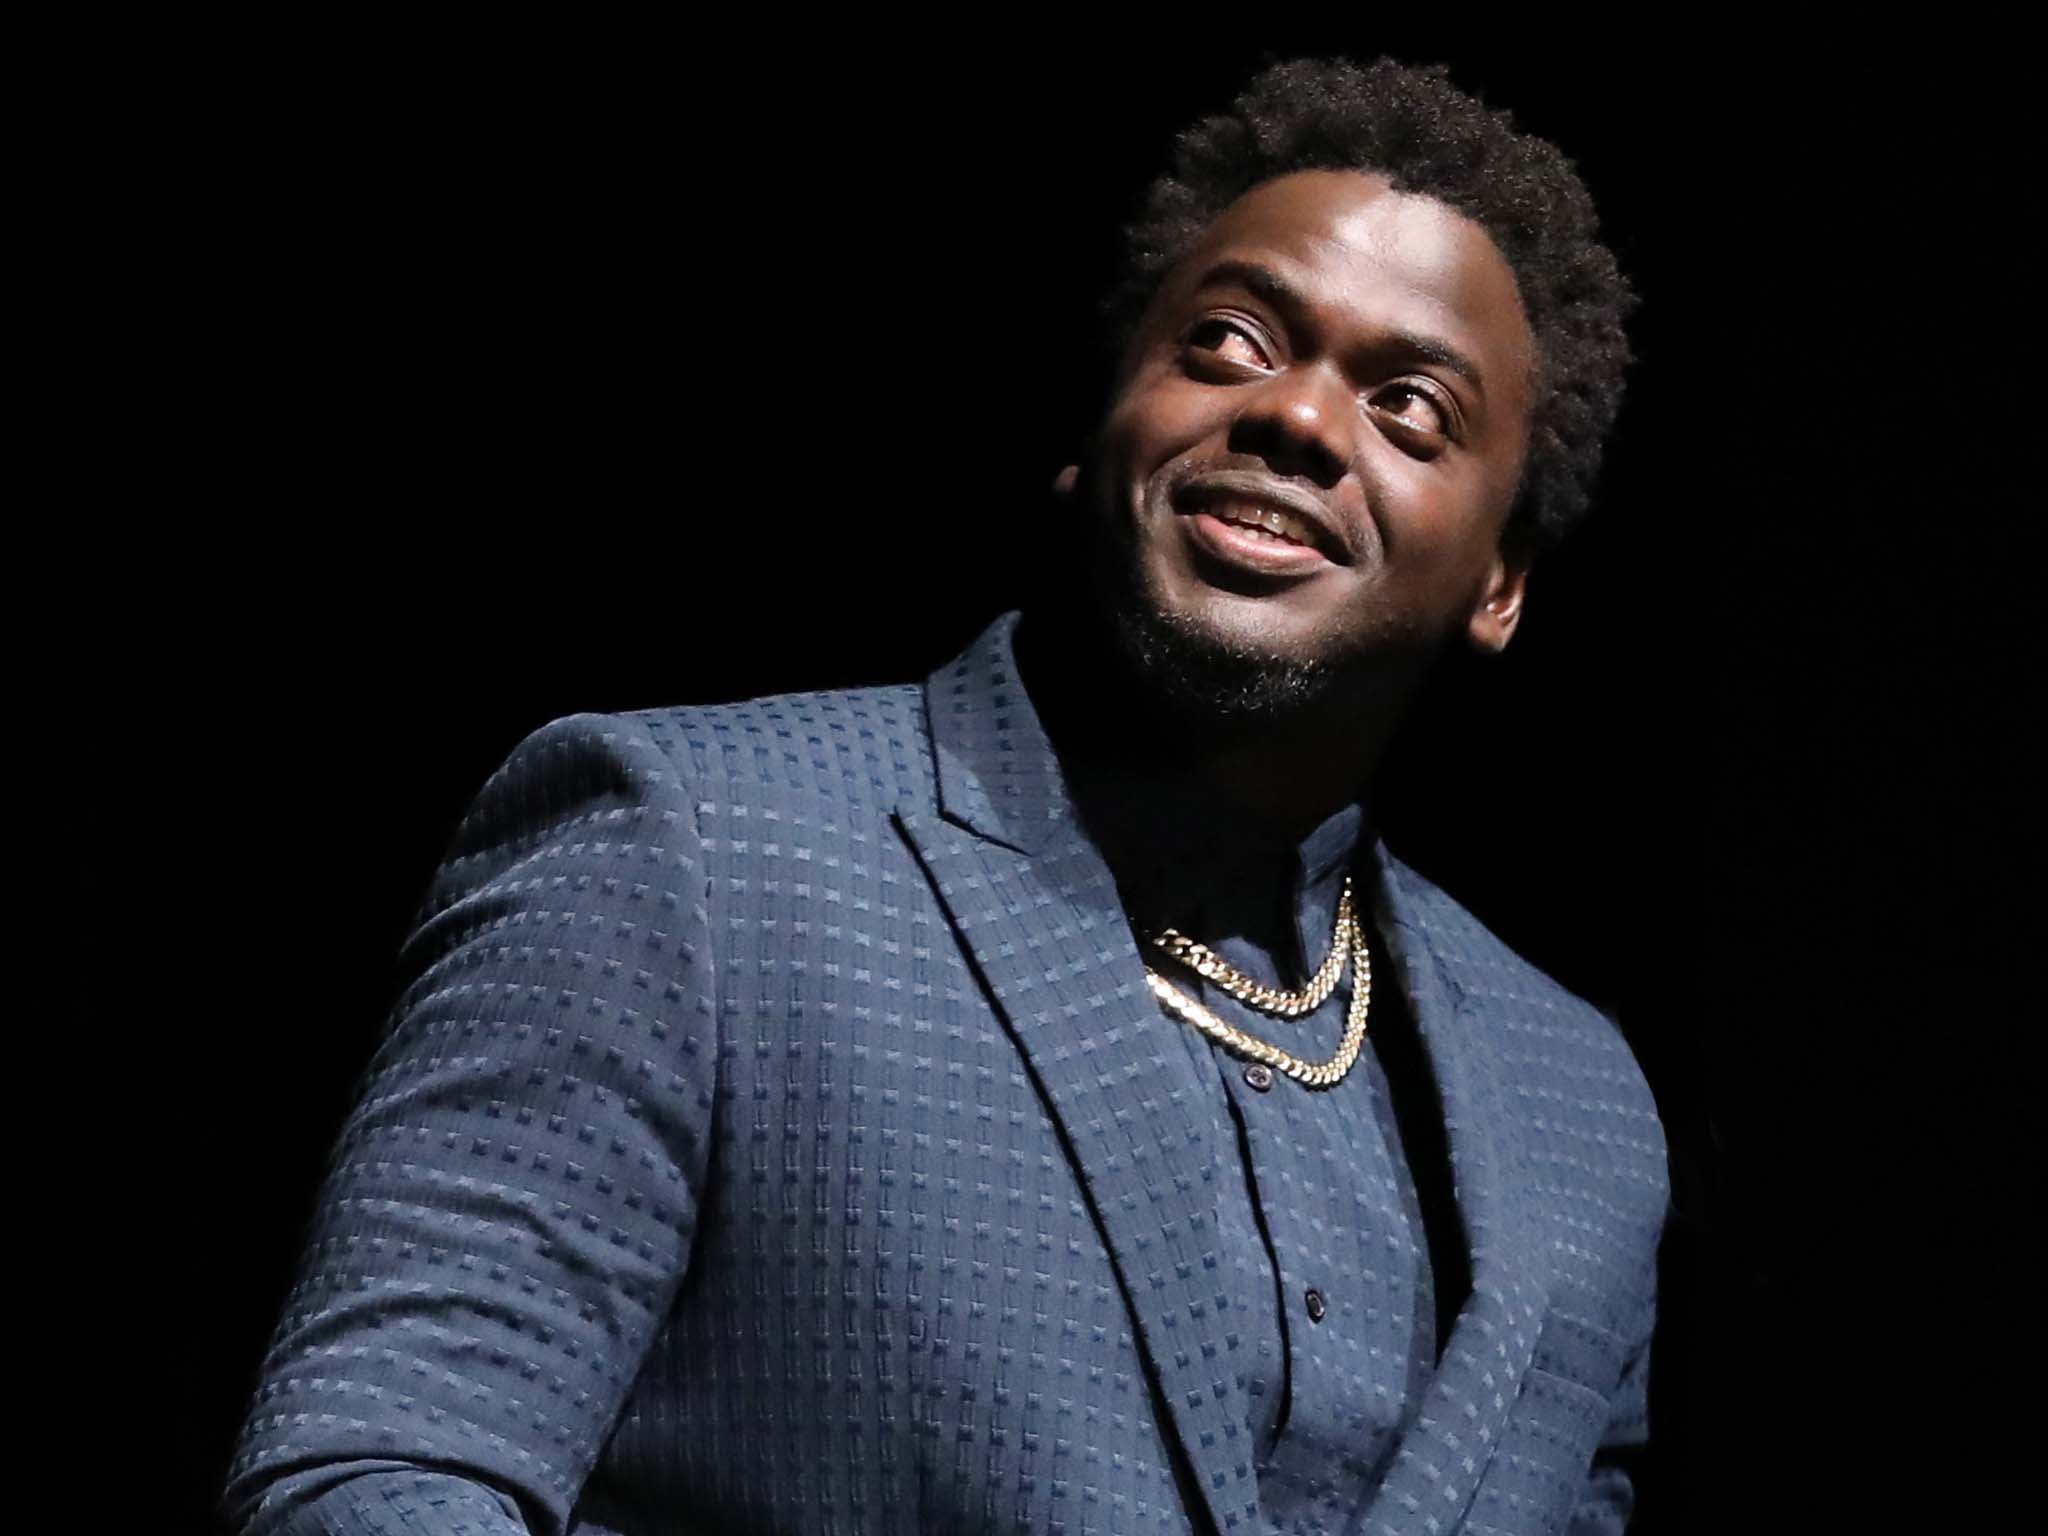 Daniel Kaluuya: 'I'm trying to stay fearless, but it becomes harder when you're more visible'